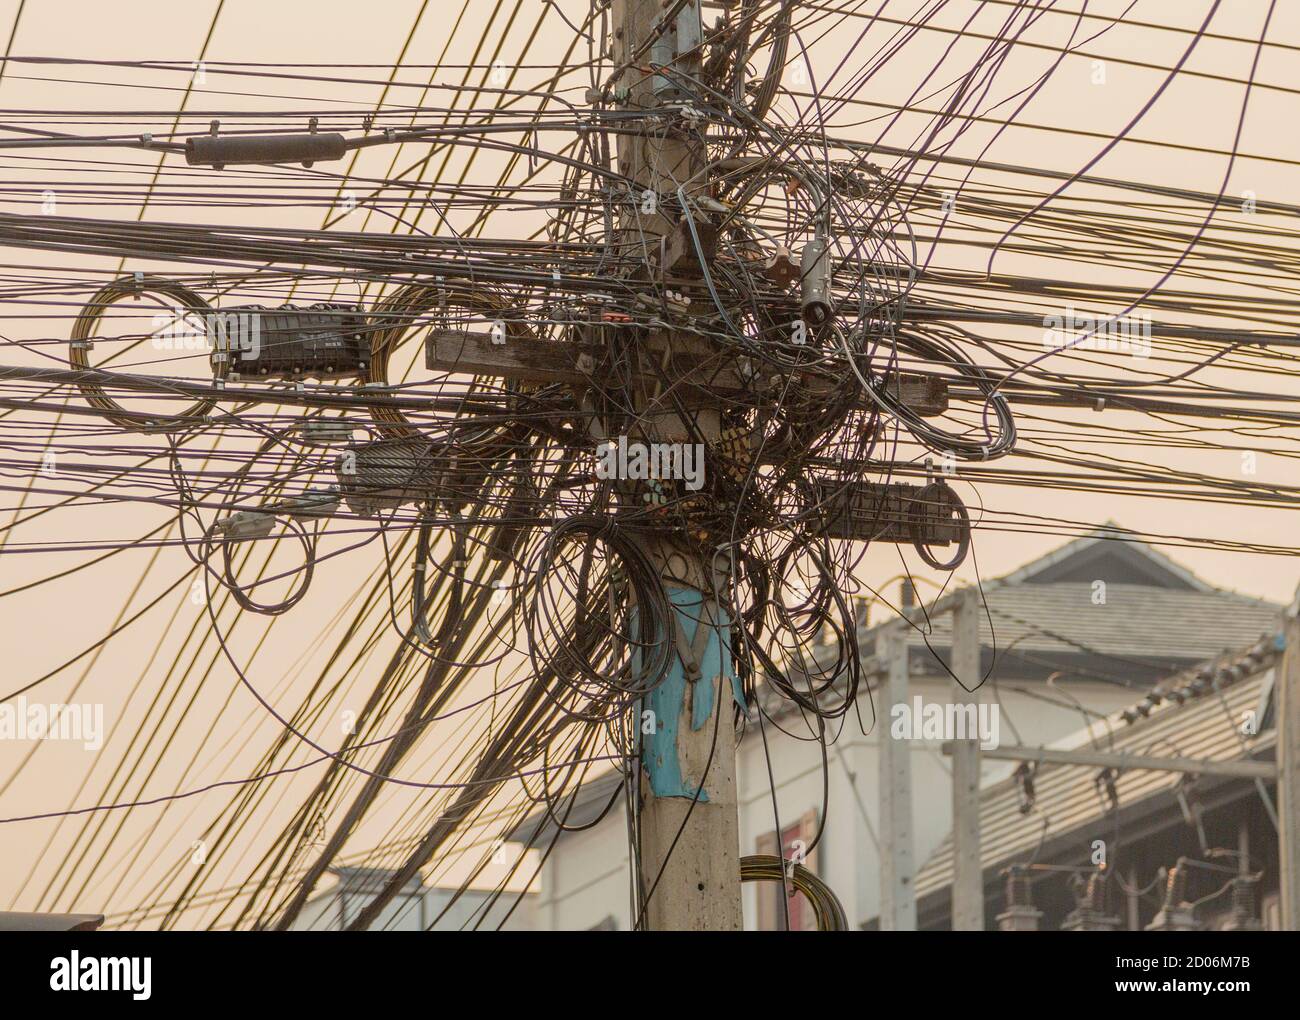 Overhead Power Telephone and Internet Cables Form a Rats Nest. Stock Photo